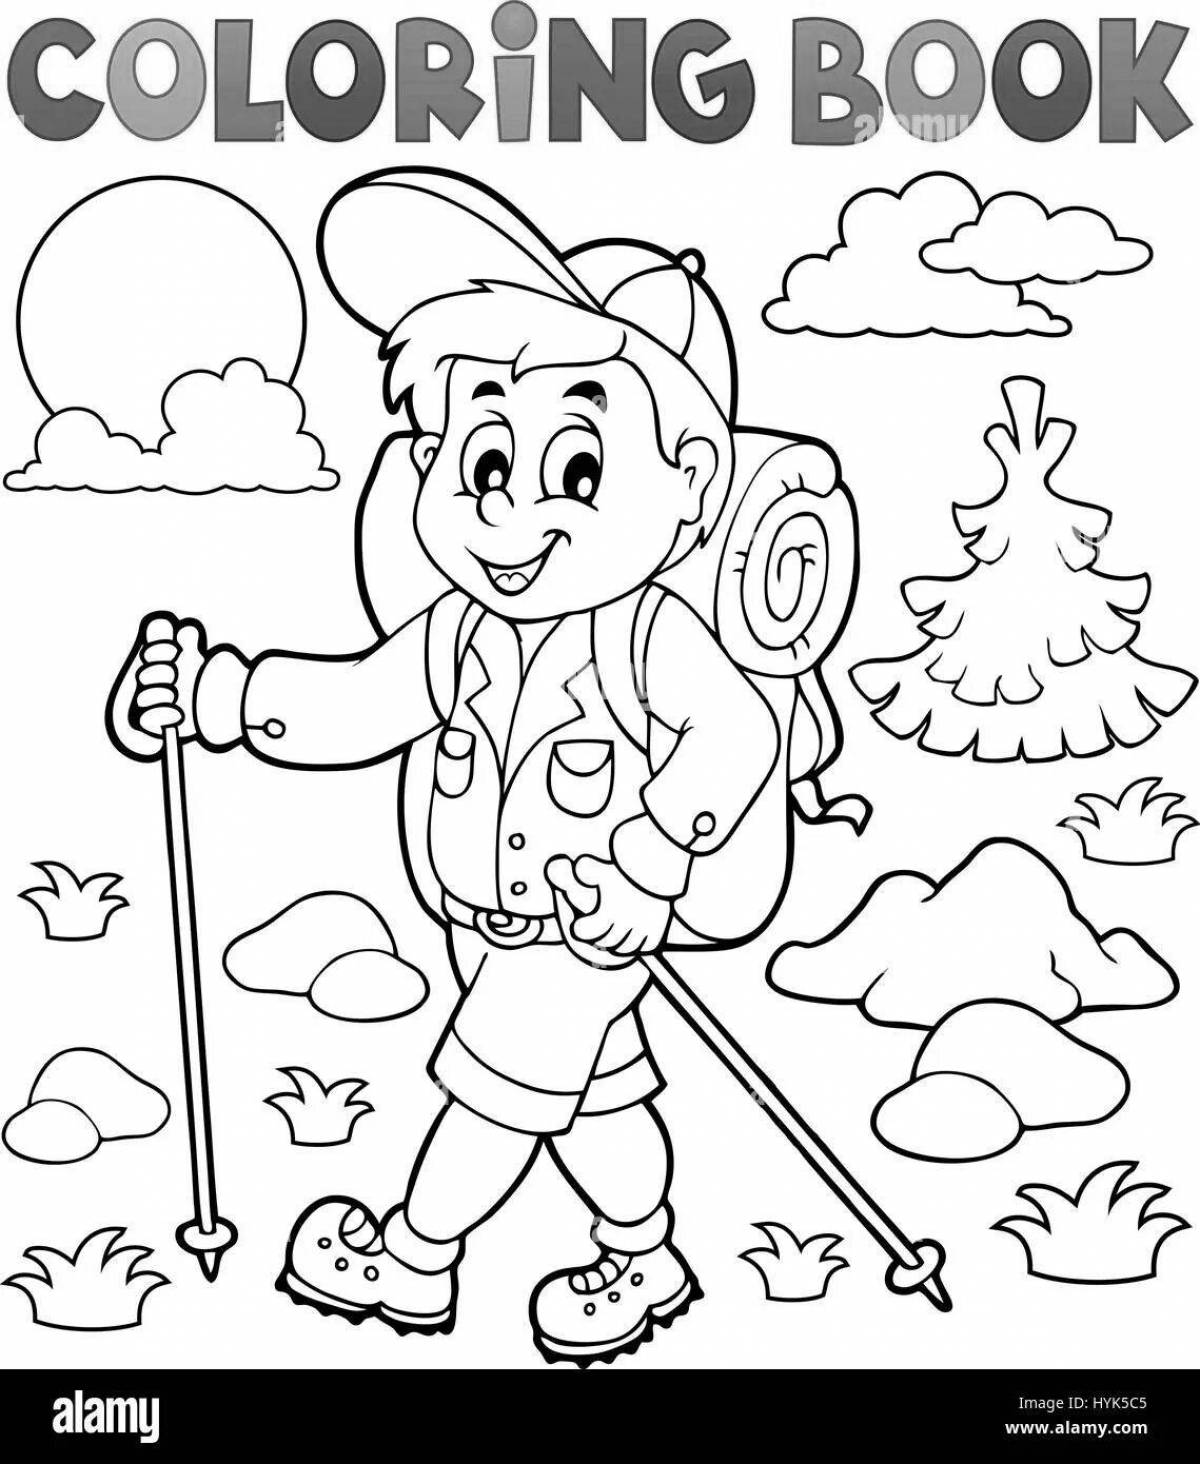 Amazing travel coloring book for kids